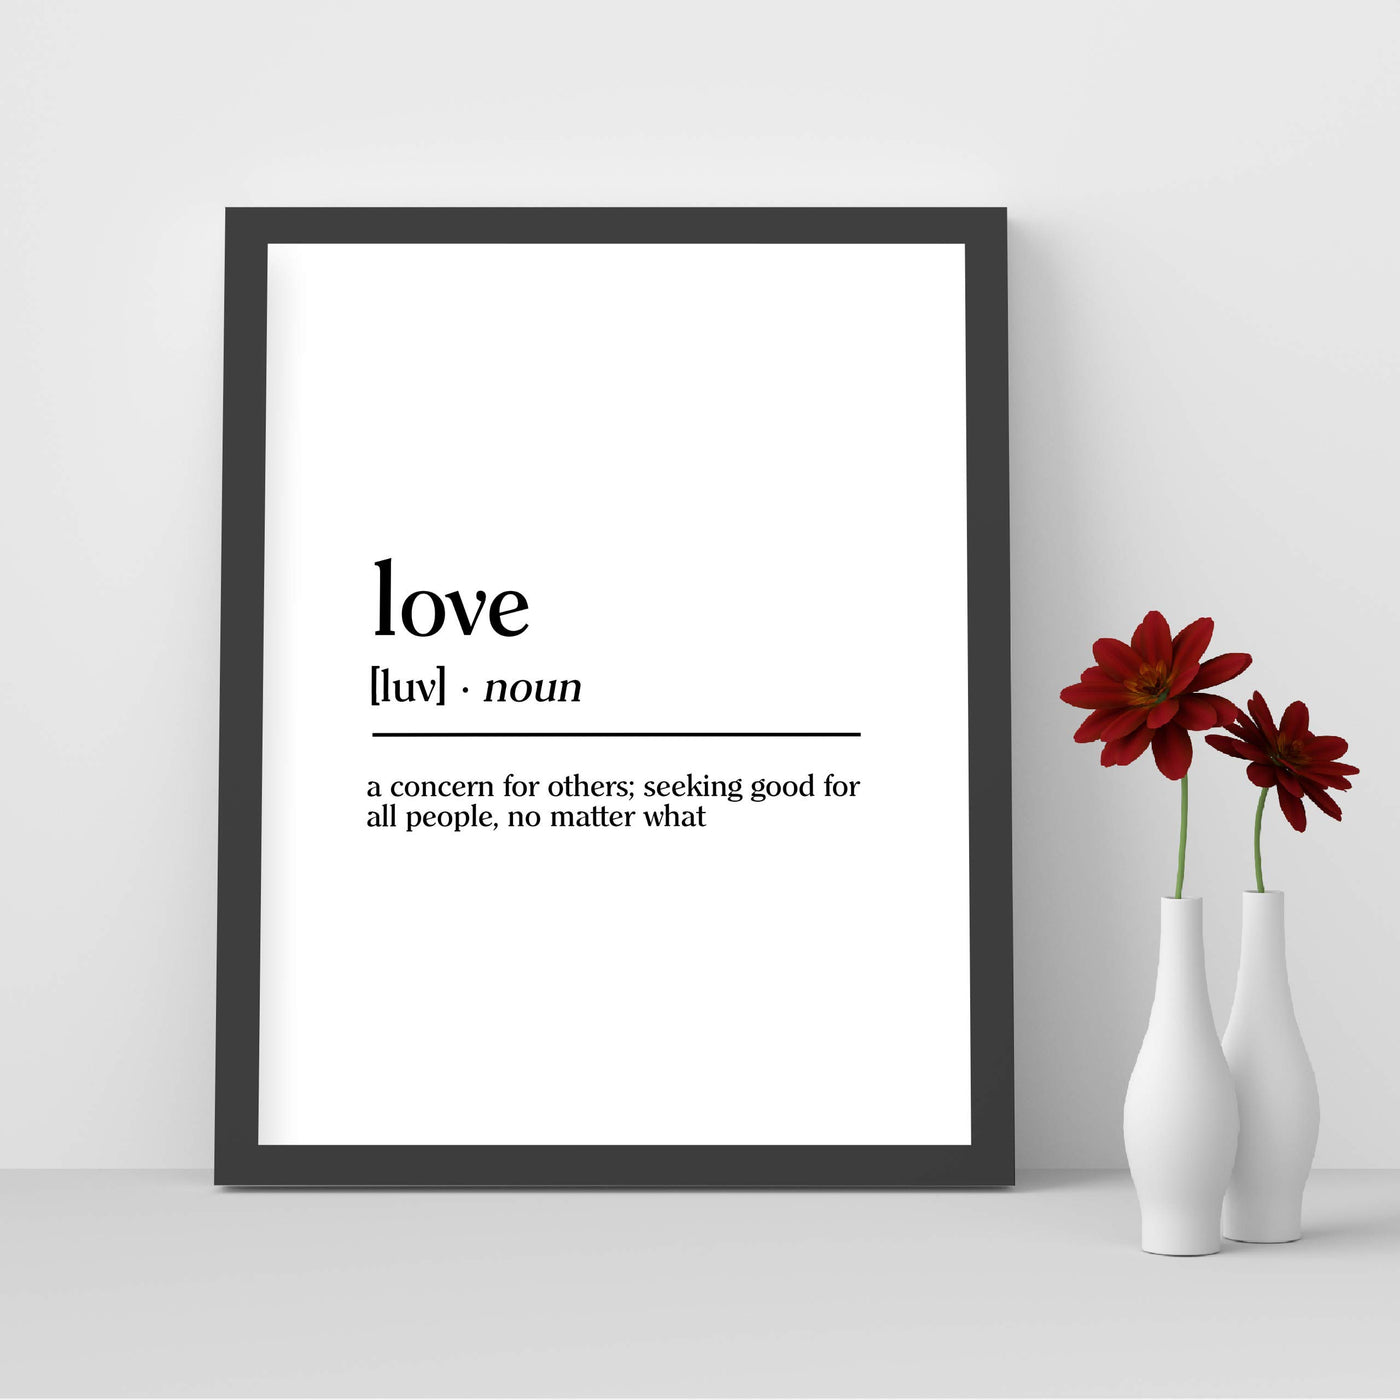 Definition of Love Inspirational Gifts of the Spirit Wall Art -8x10" Modern Christian Print-Ready to Frame. Typographic Design. Home-Office-Farmhouse-Church Decor. Great Wedding-Bridal Shower Gift!